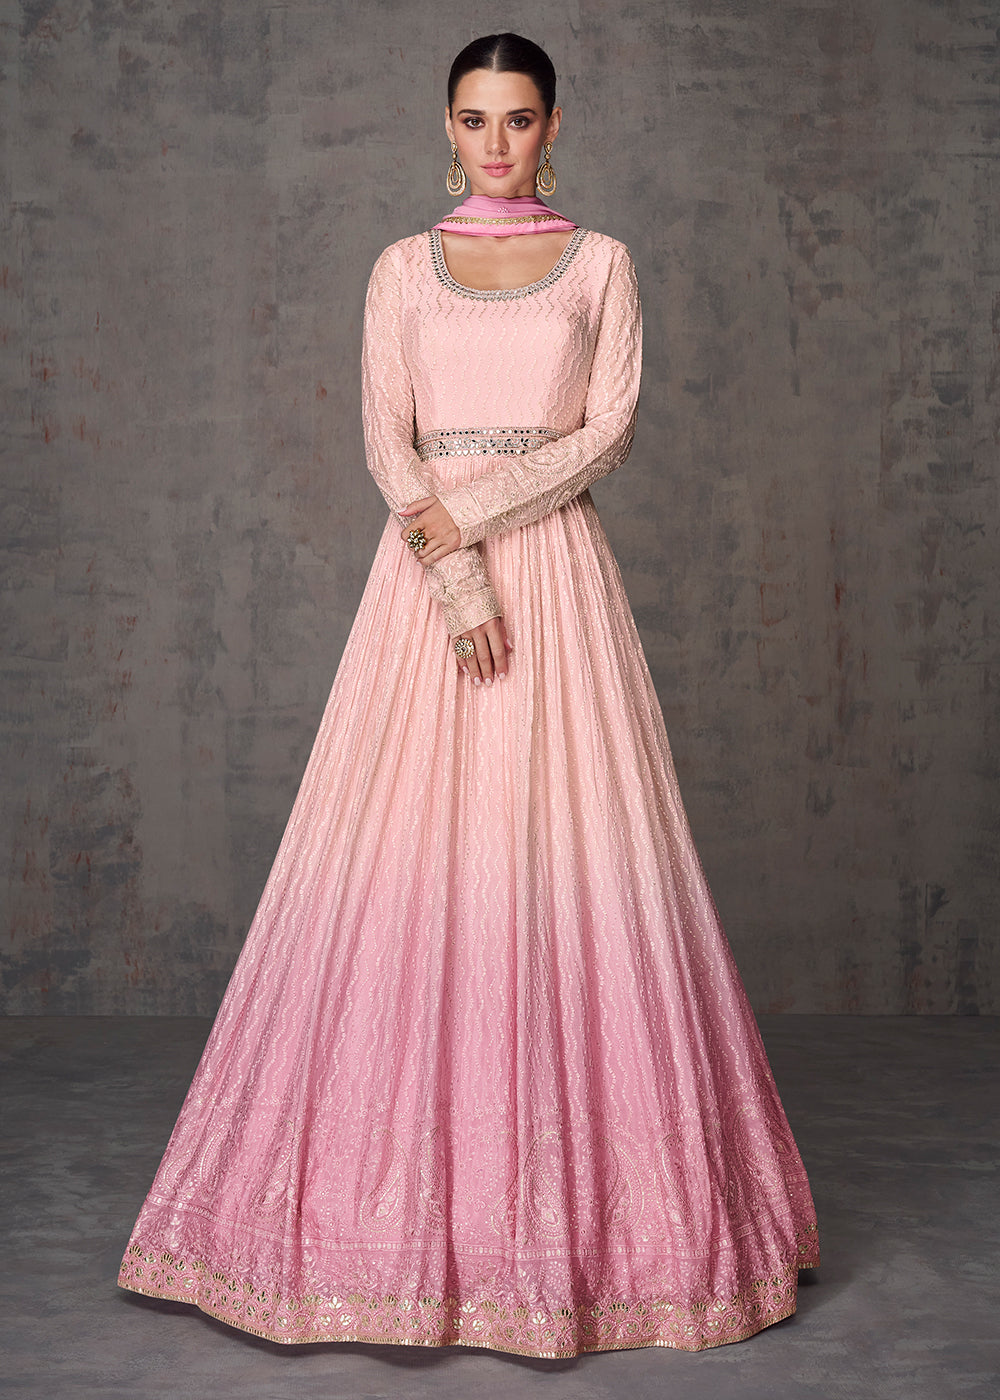 Buy Now Sequins & Faux Mirror Embroidered Indian Wedding Gown in Pink Online in USA, UK, Australia, Canada & Worldwide at Empress Clothing.